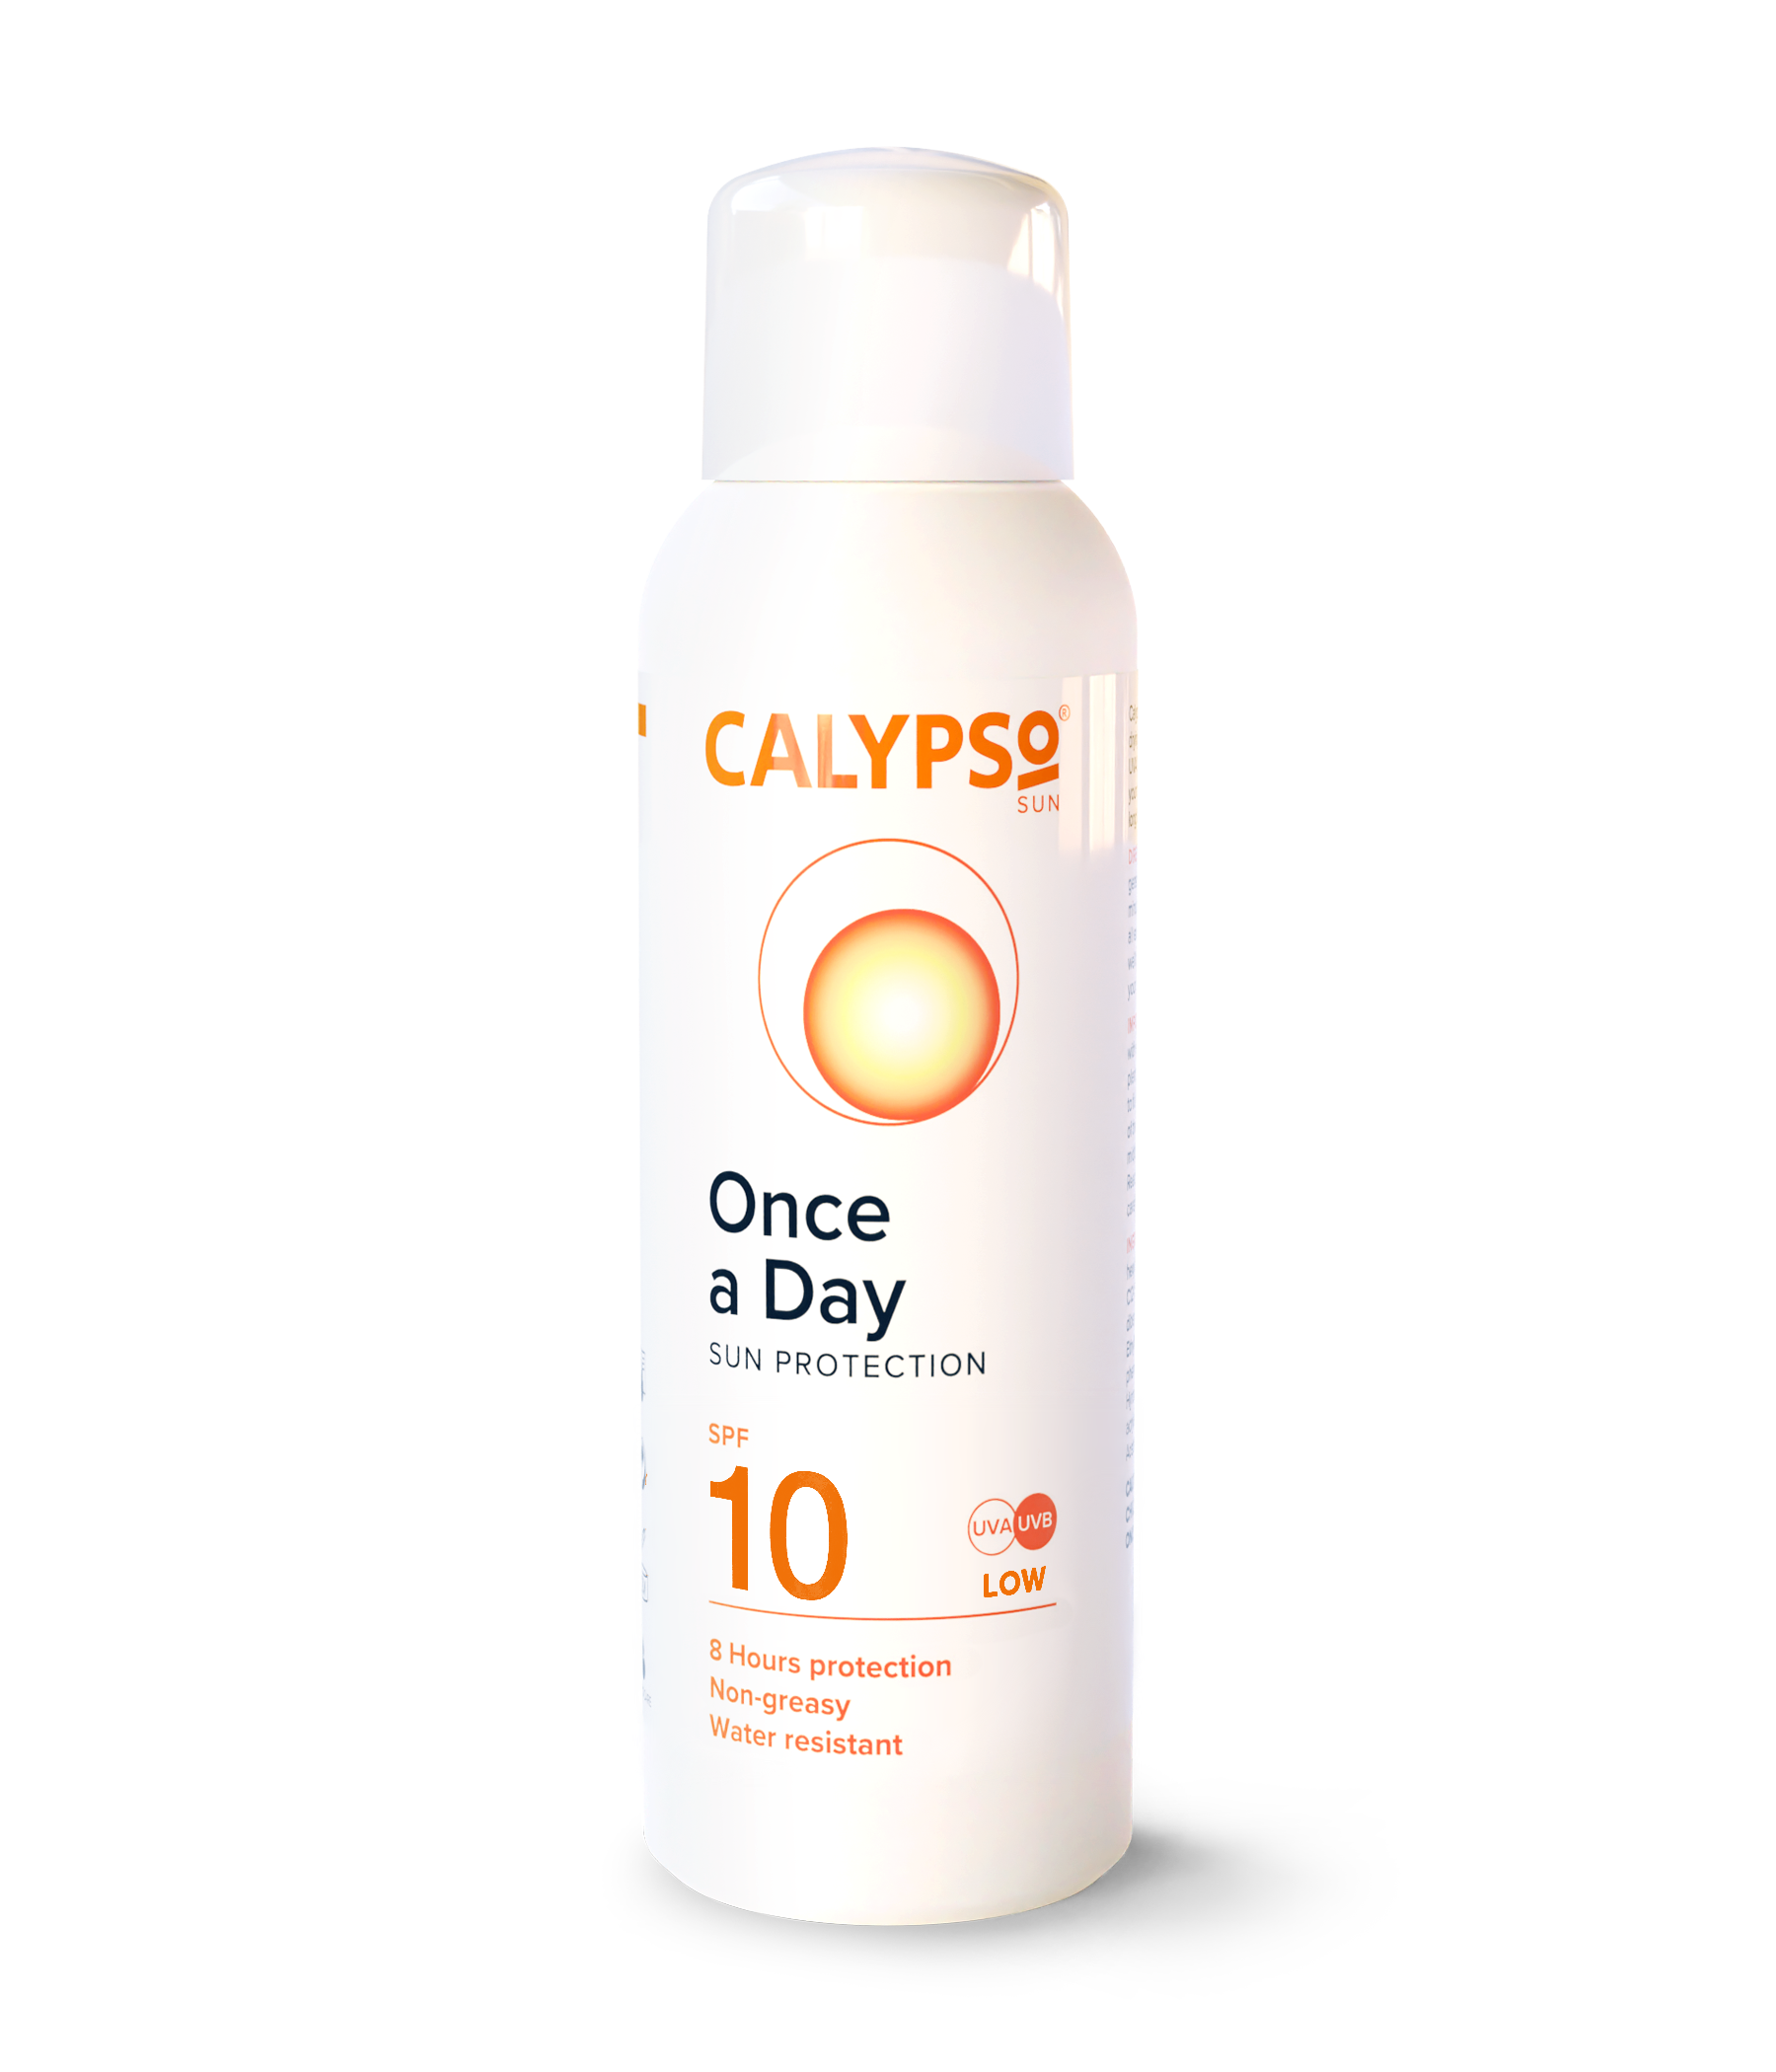 Calypso Once a Day sunscreen SPF10 bottle